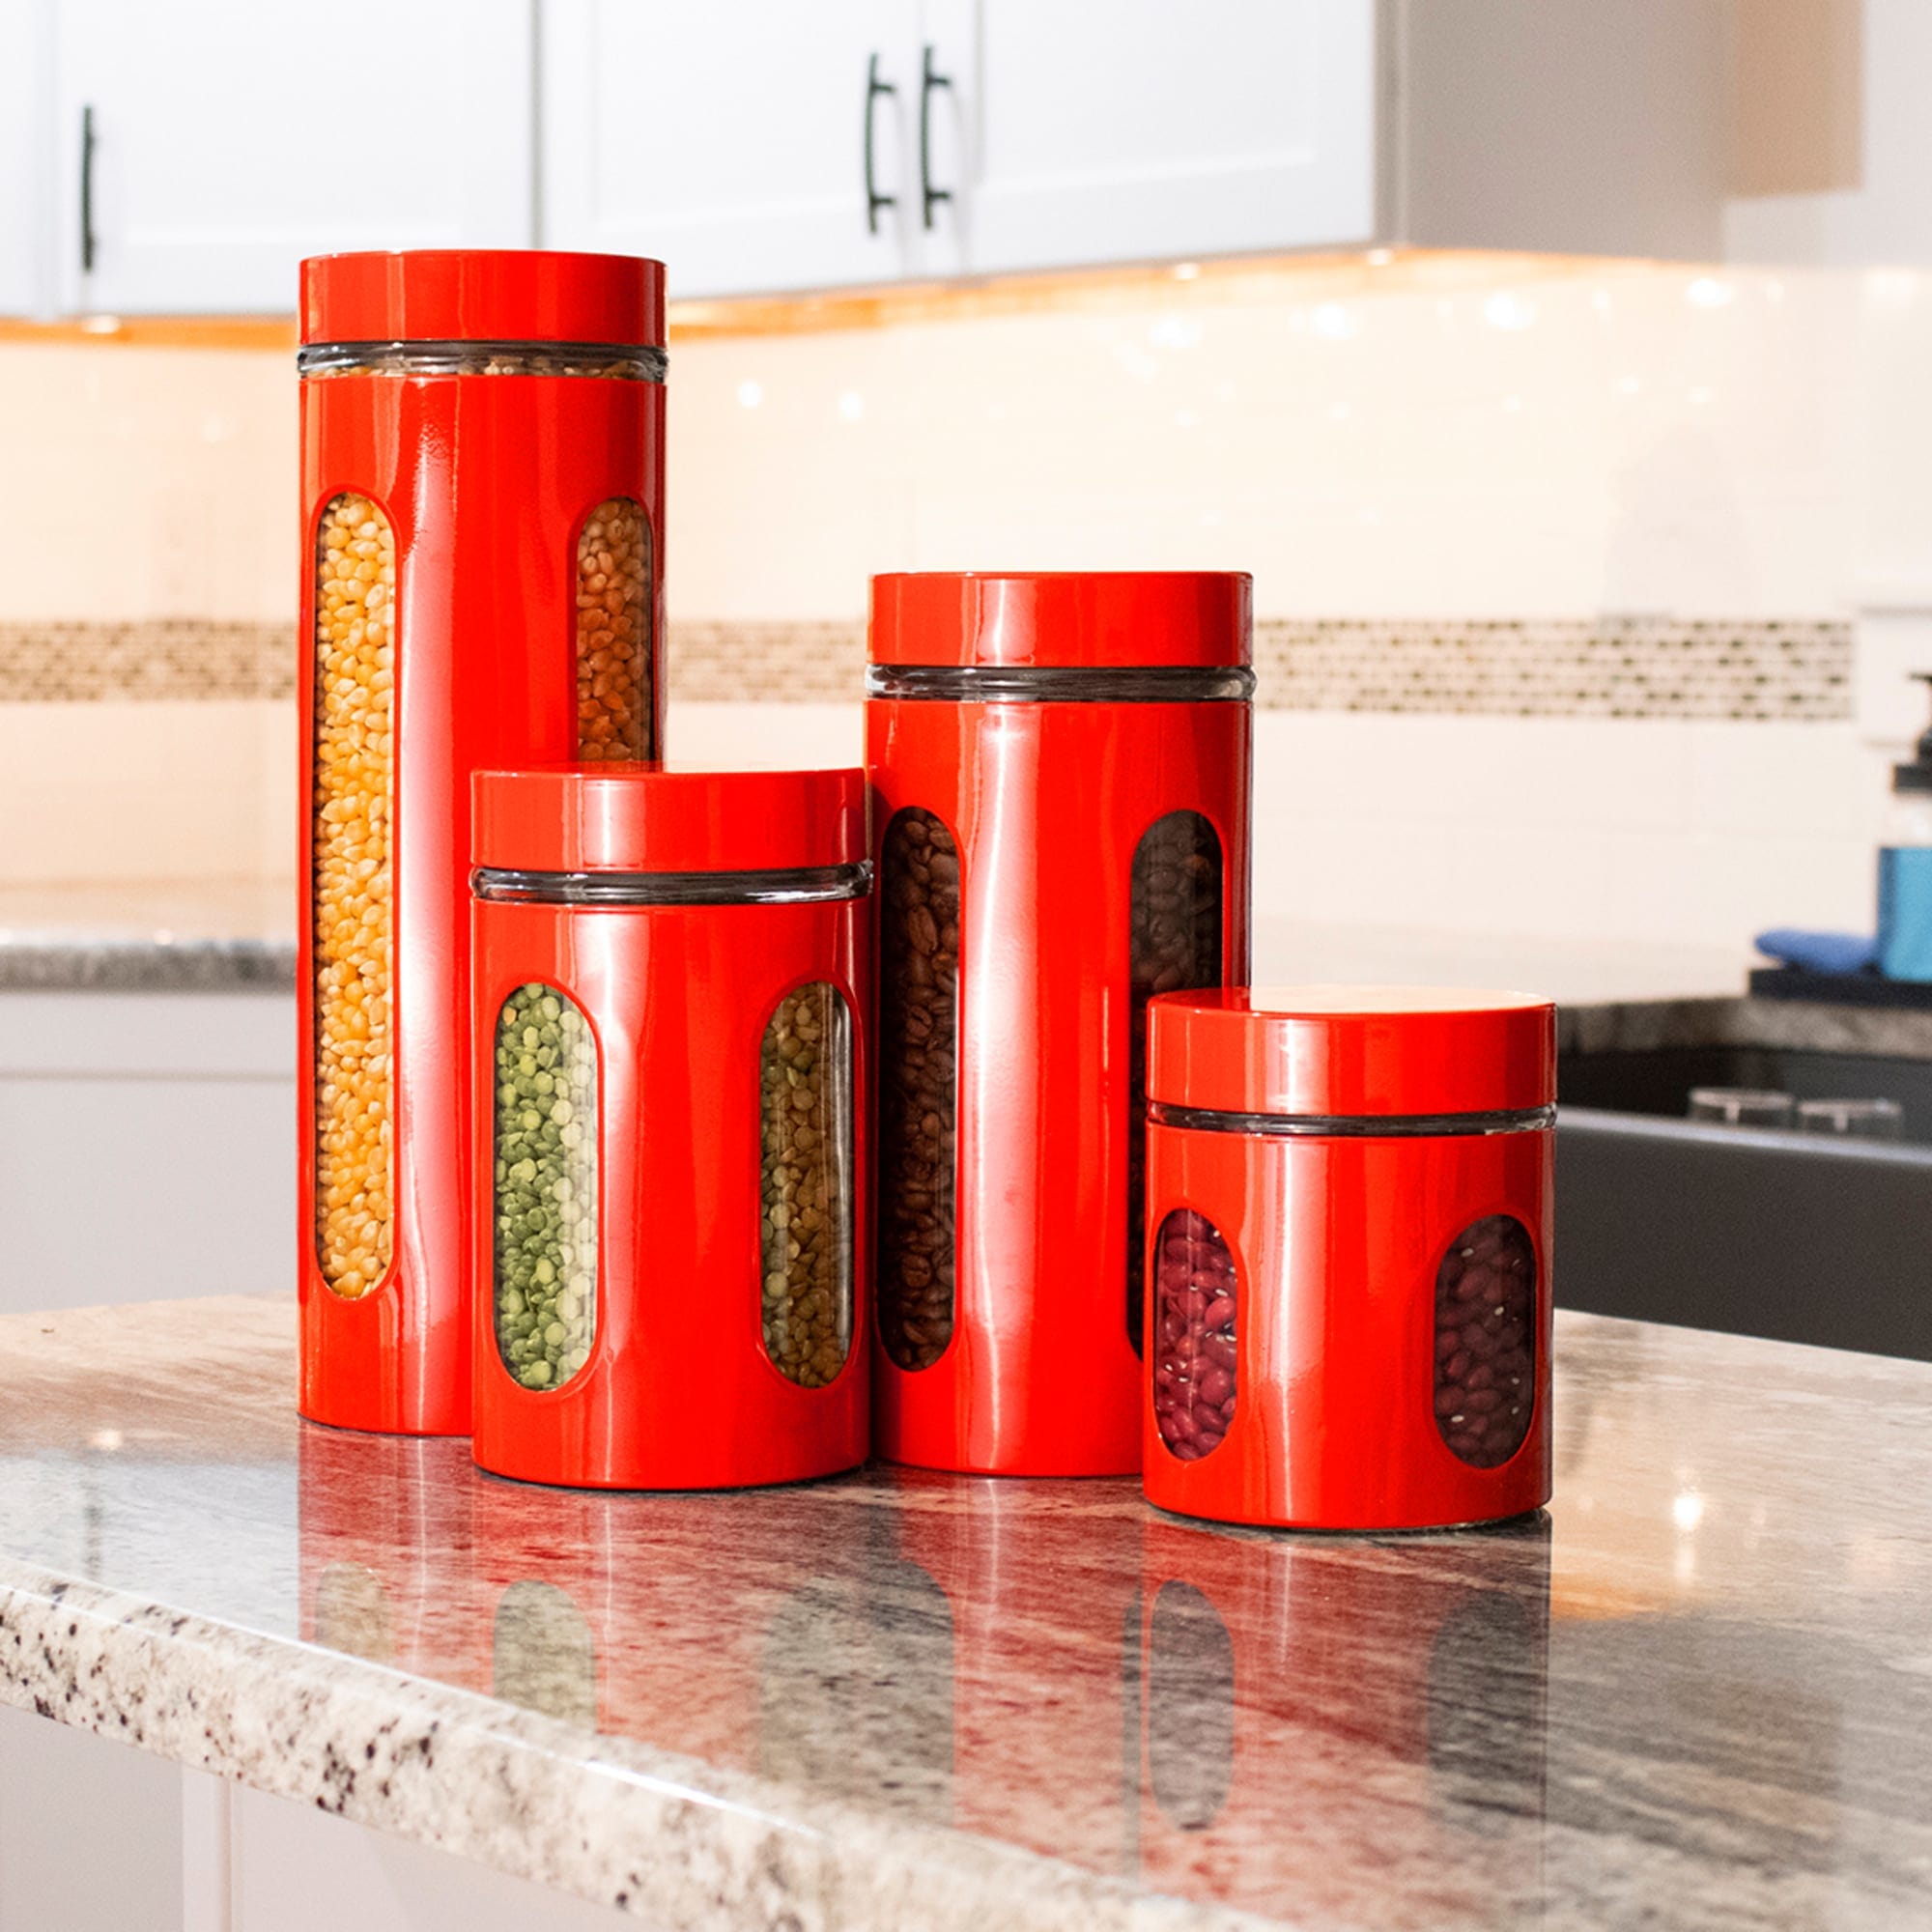 Home Basics 4 Piece Essence Collection Metal Canister Set, Red $15.00 EACH, CASE PACK OF 4